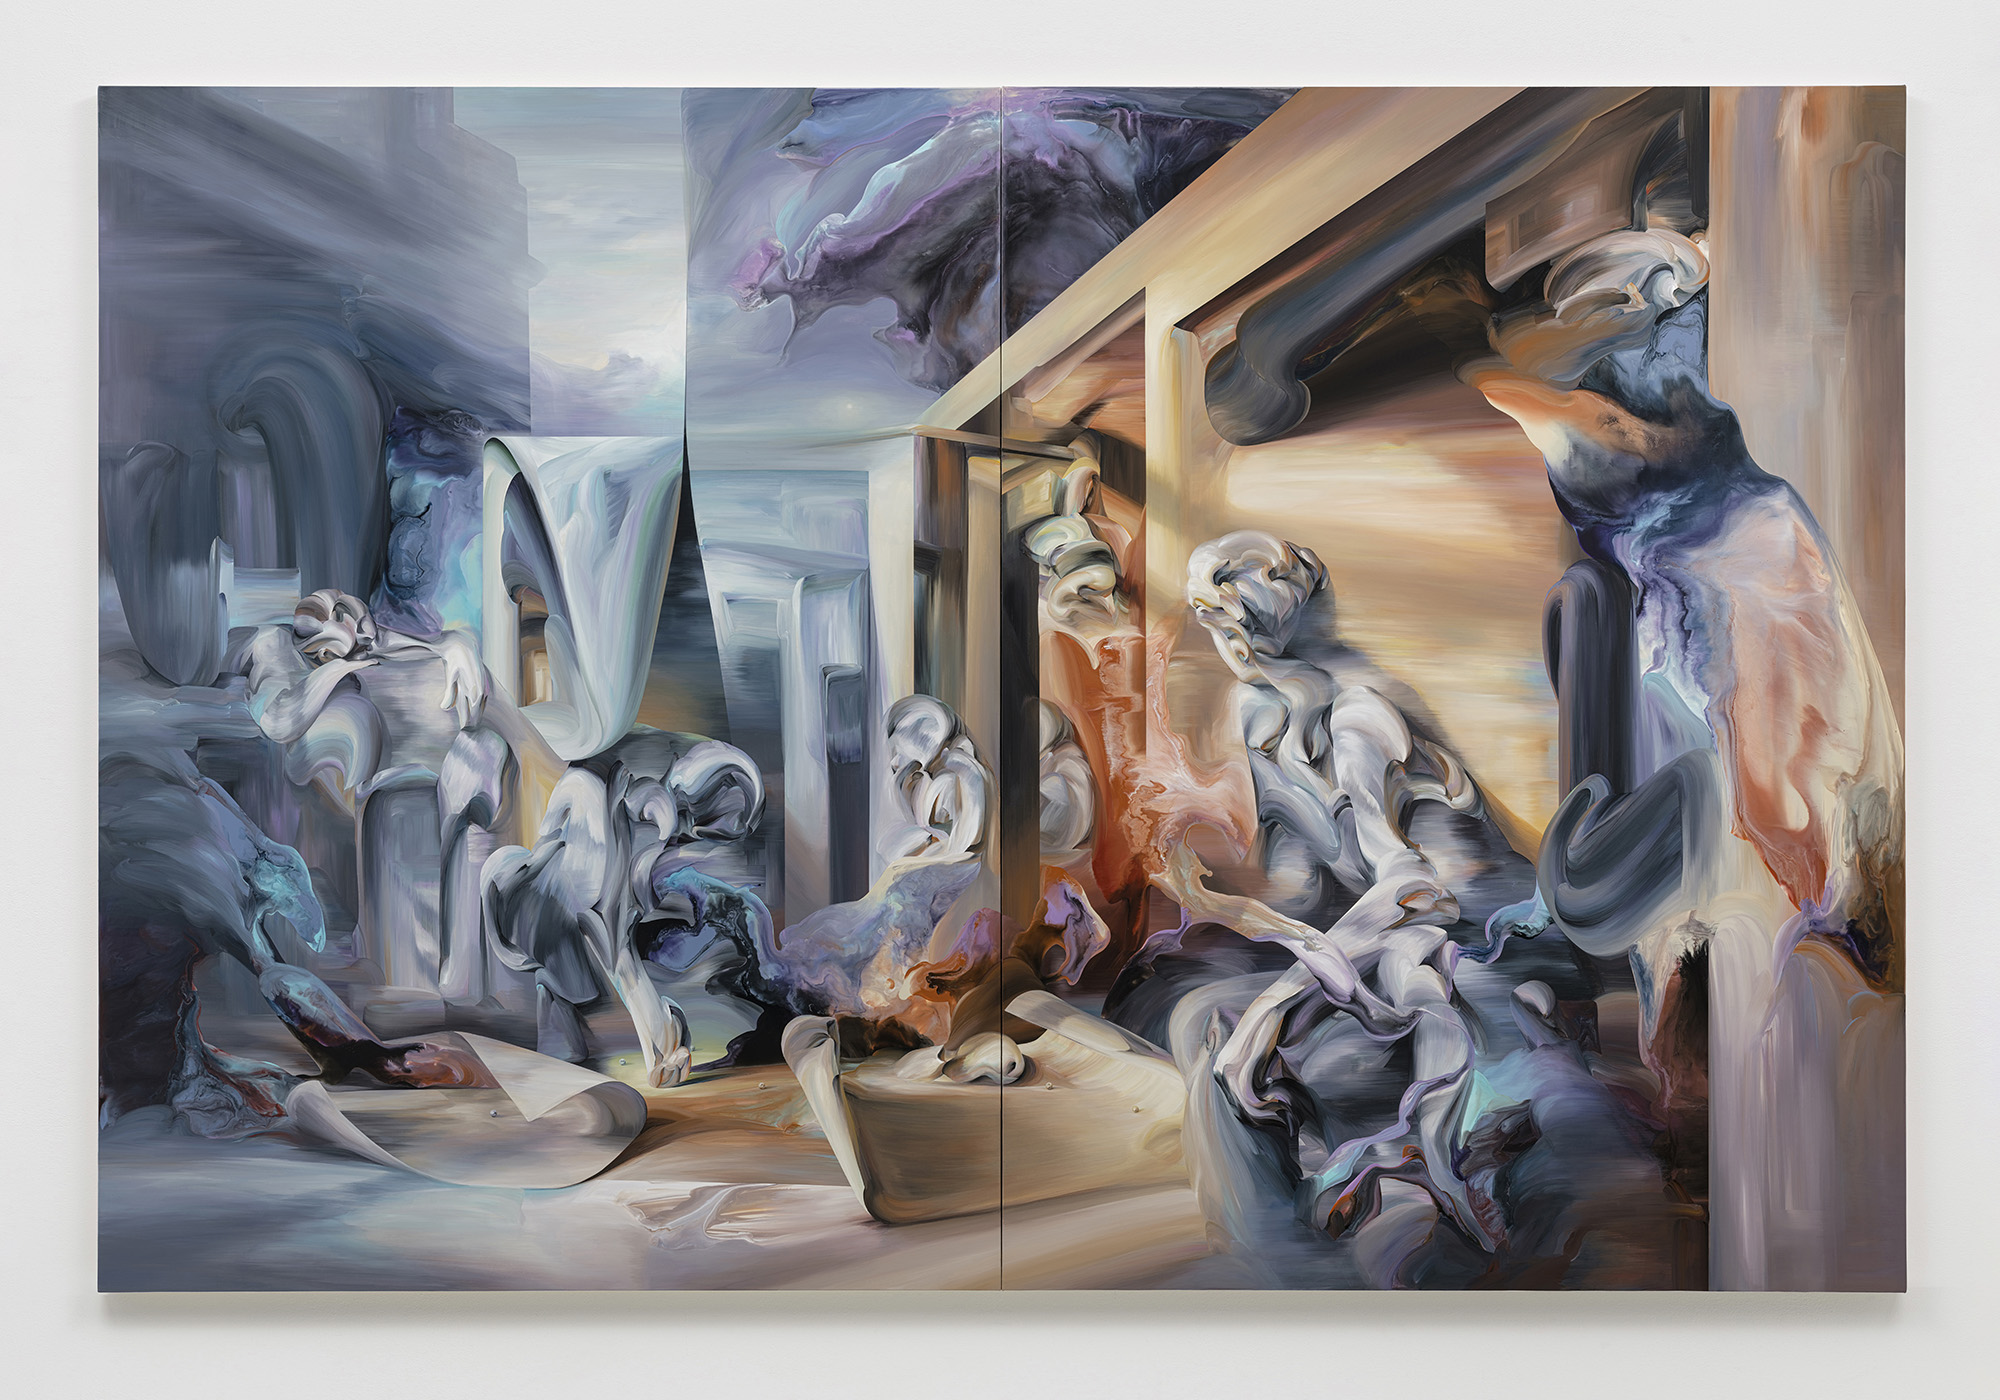 Huang Ko Wei, Tomorrow After Tomorrow, 2022, acrylic on canvas, diptych, each: 180 x 135 cm; 70 7/8 x 53 1/8 in; overall: 180 x 270 cm; 70 7/8 x 106 1/4 in.